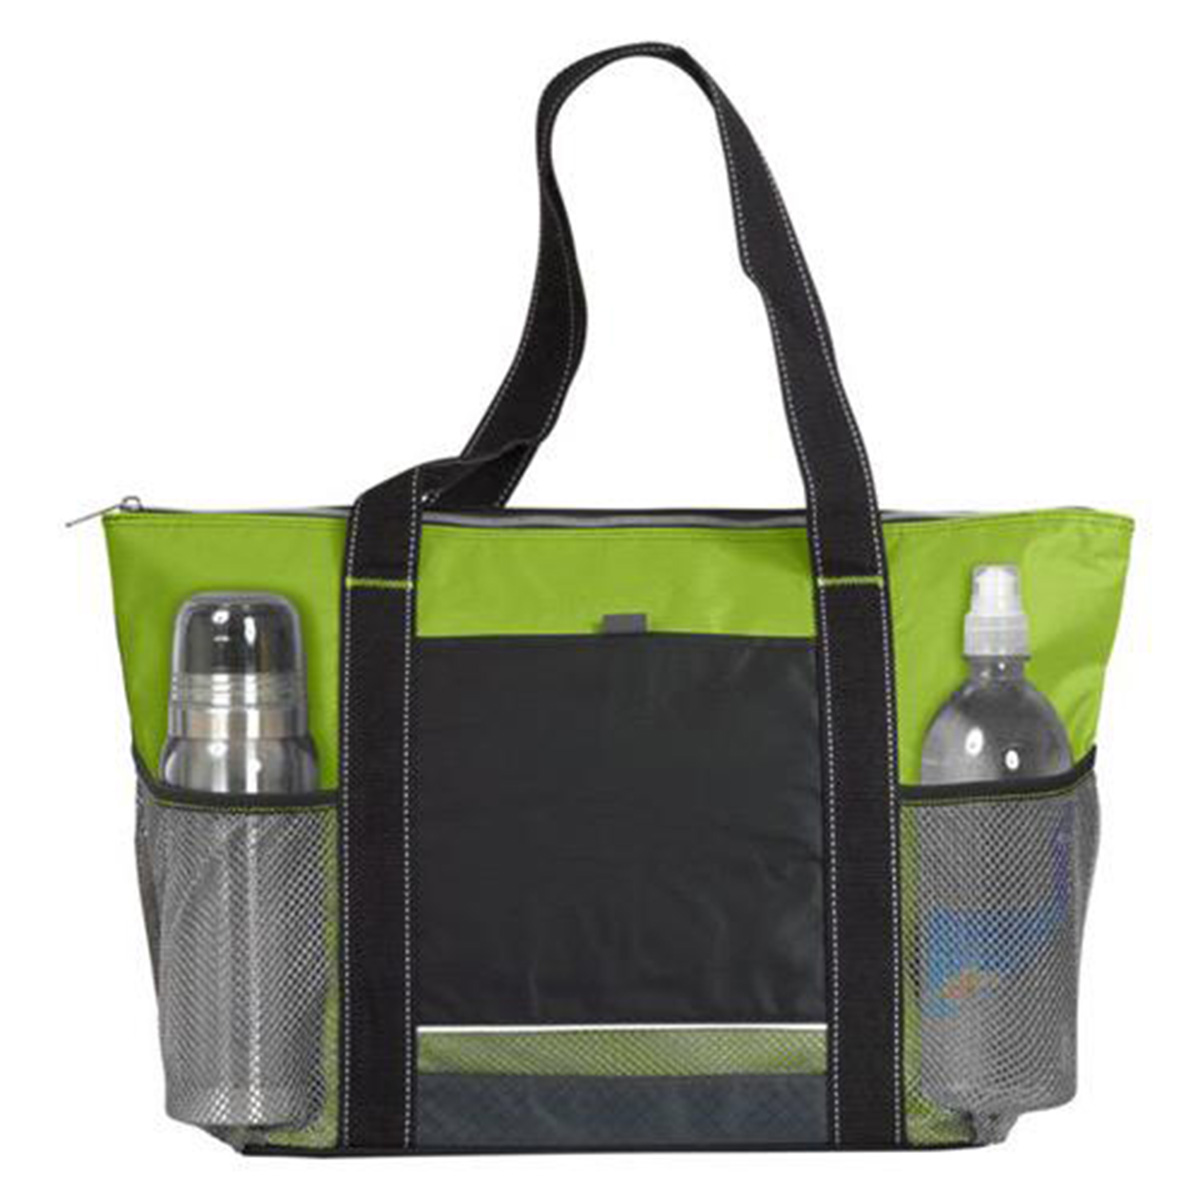 Black/Apple Green Atchison Icy Bright Cooler Tote